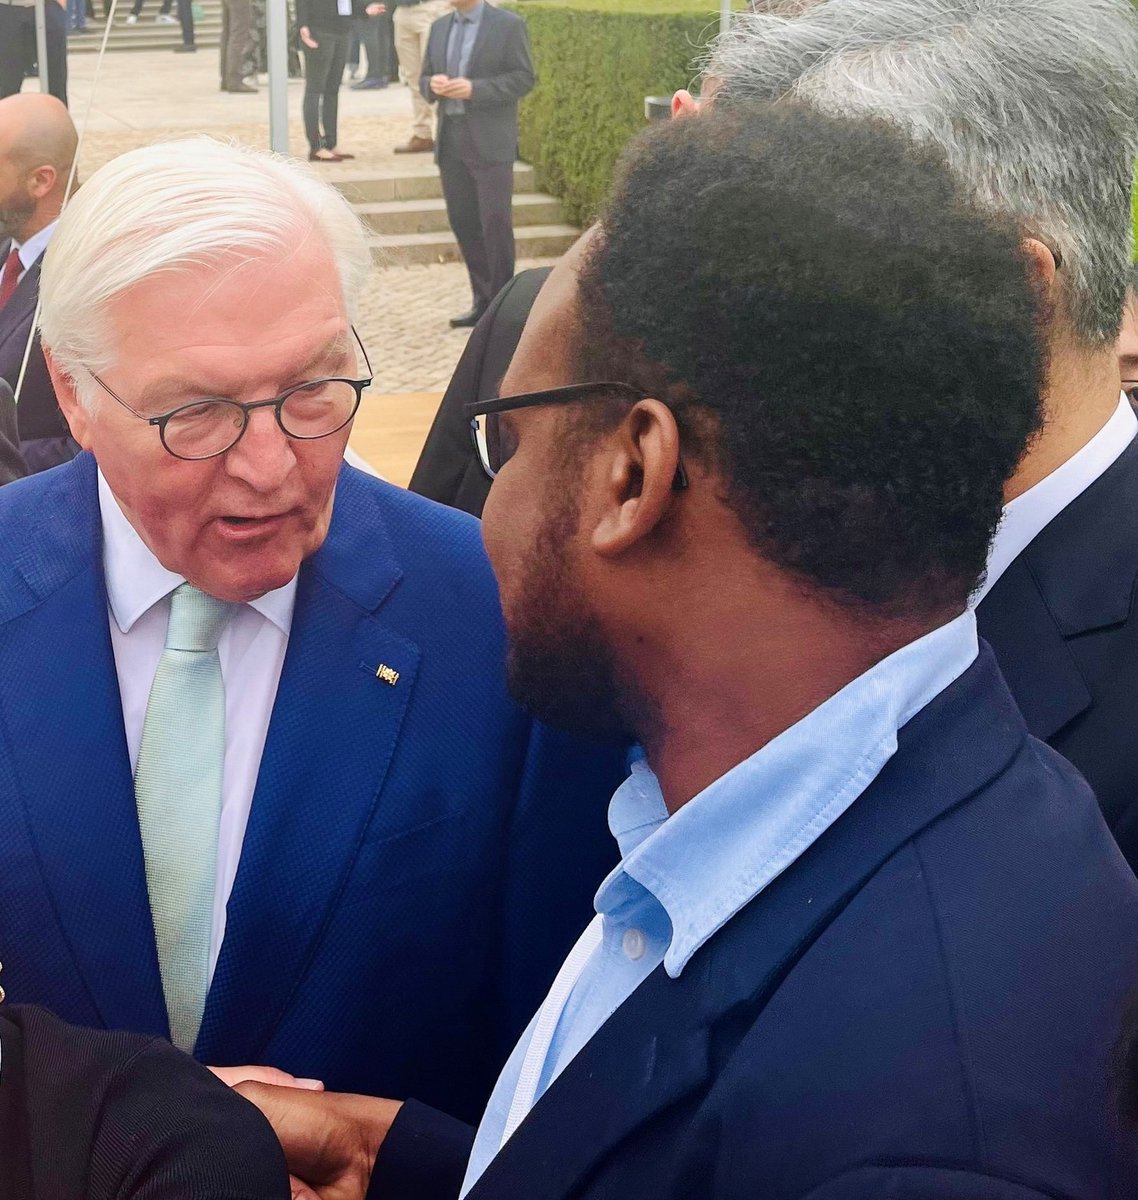 Today I was honored to briefly talk to the German President, Steinmeier, at the @AvHStiftung  annual meeting. He mentioned his visit to Sudan in 2020, following the revolution, and the hope they had.
 
I wish the war in Sudan ends soon to restore hope to its people.
#AvHWhatsNext